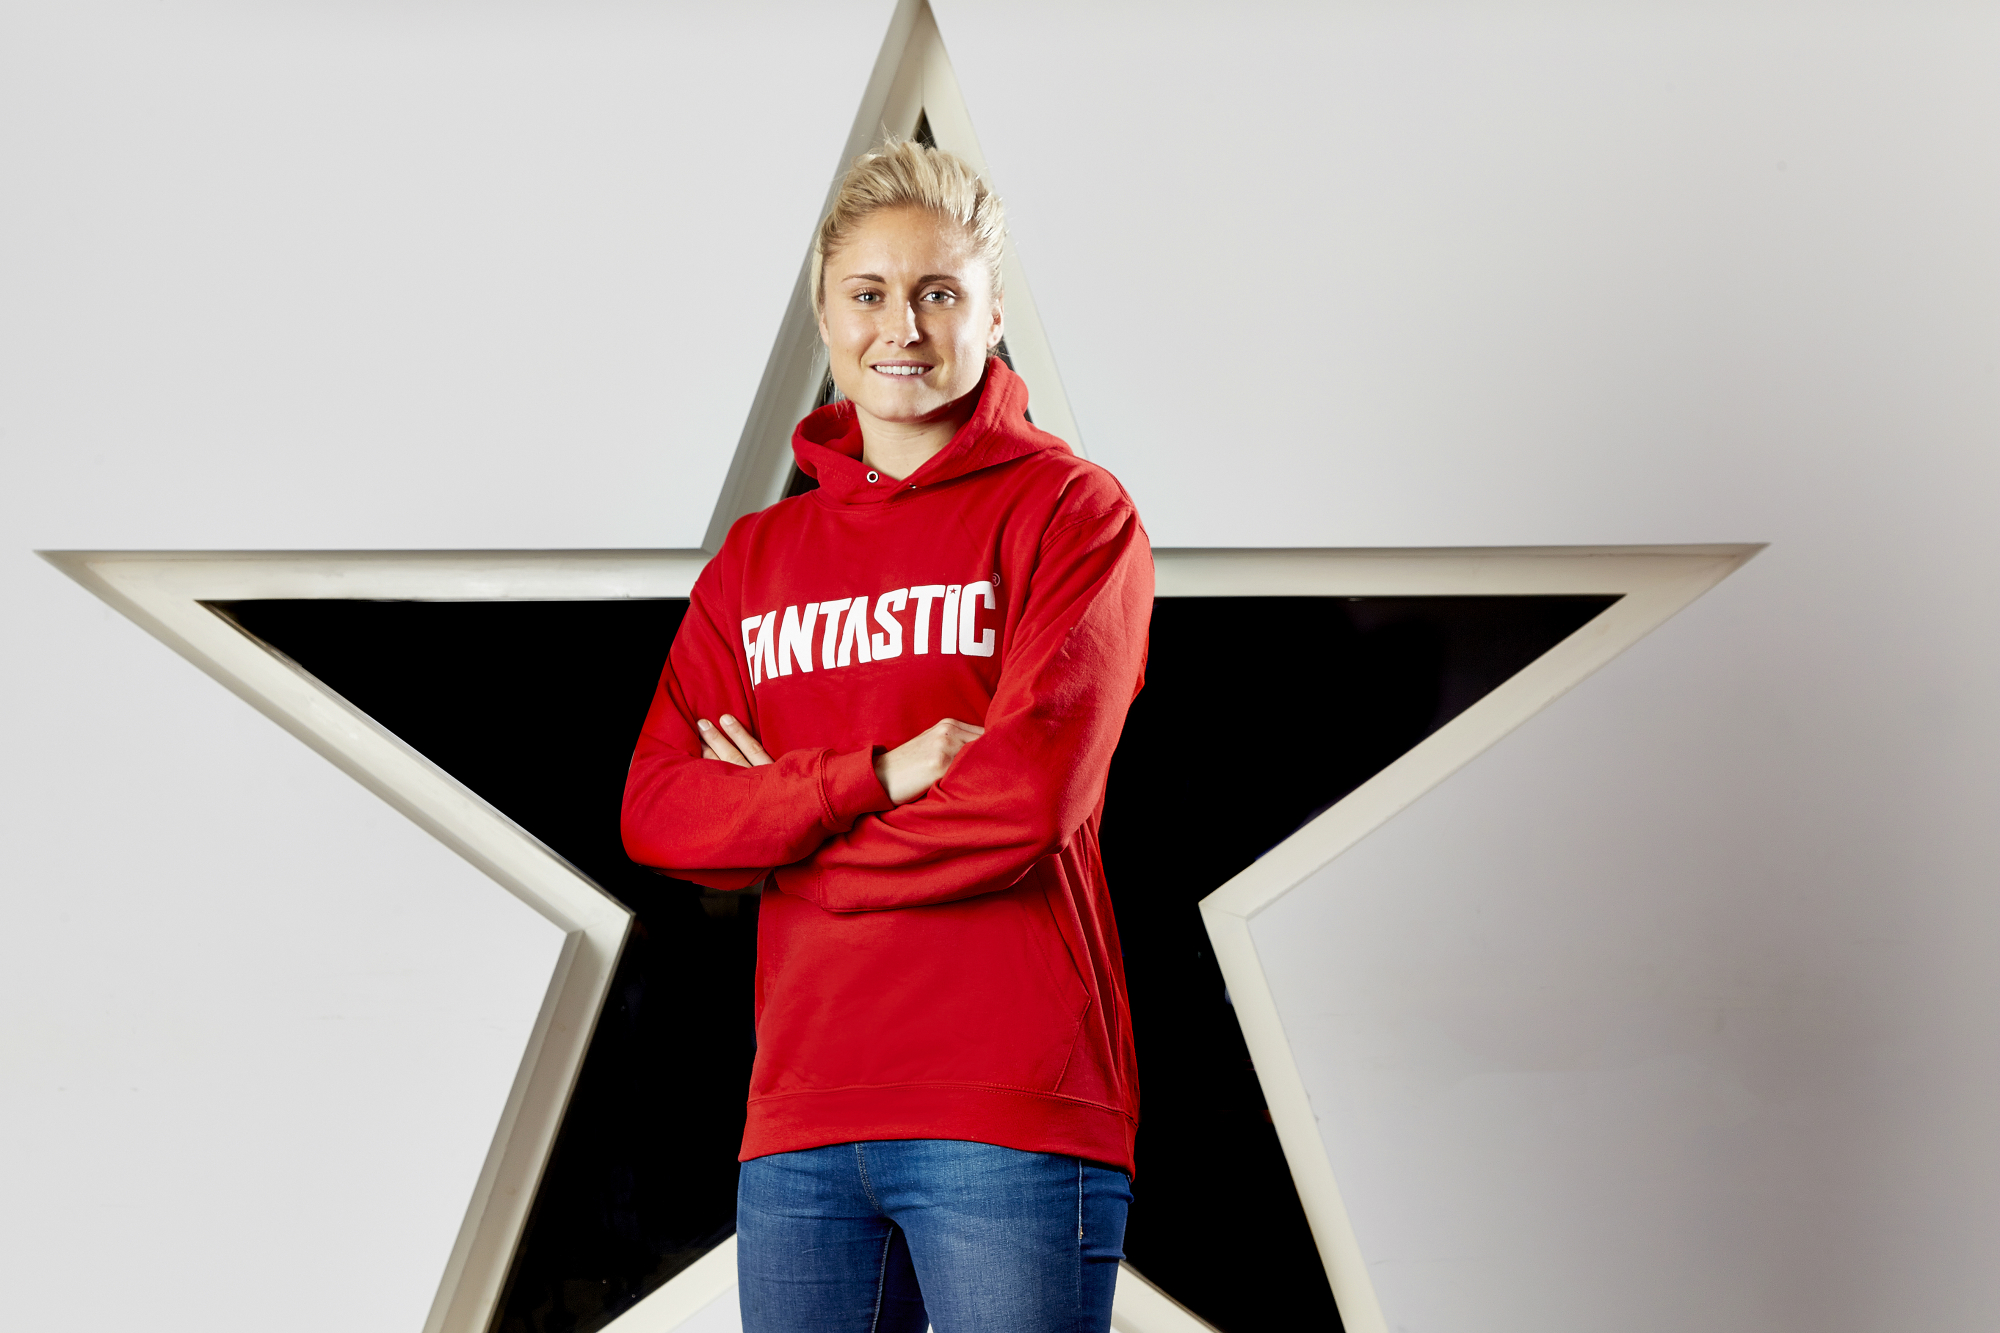 Steph Houghton signs with team Fantastic for online project